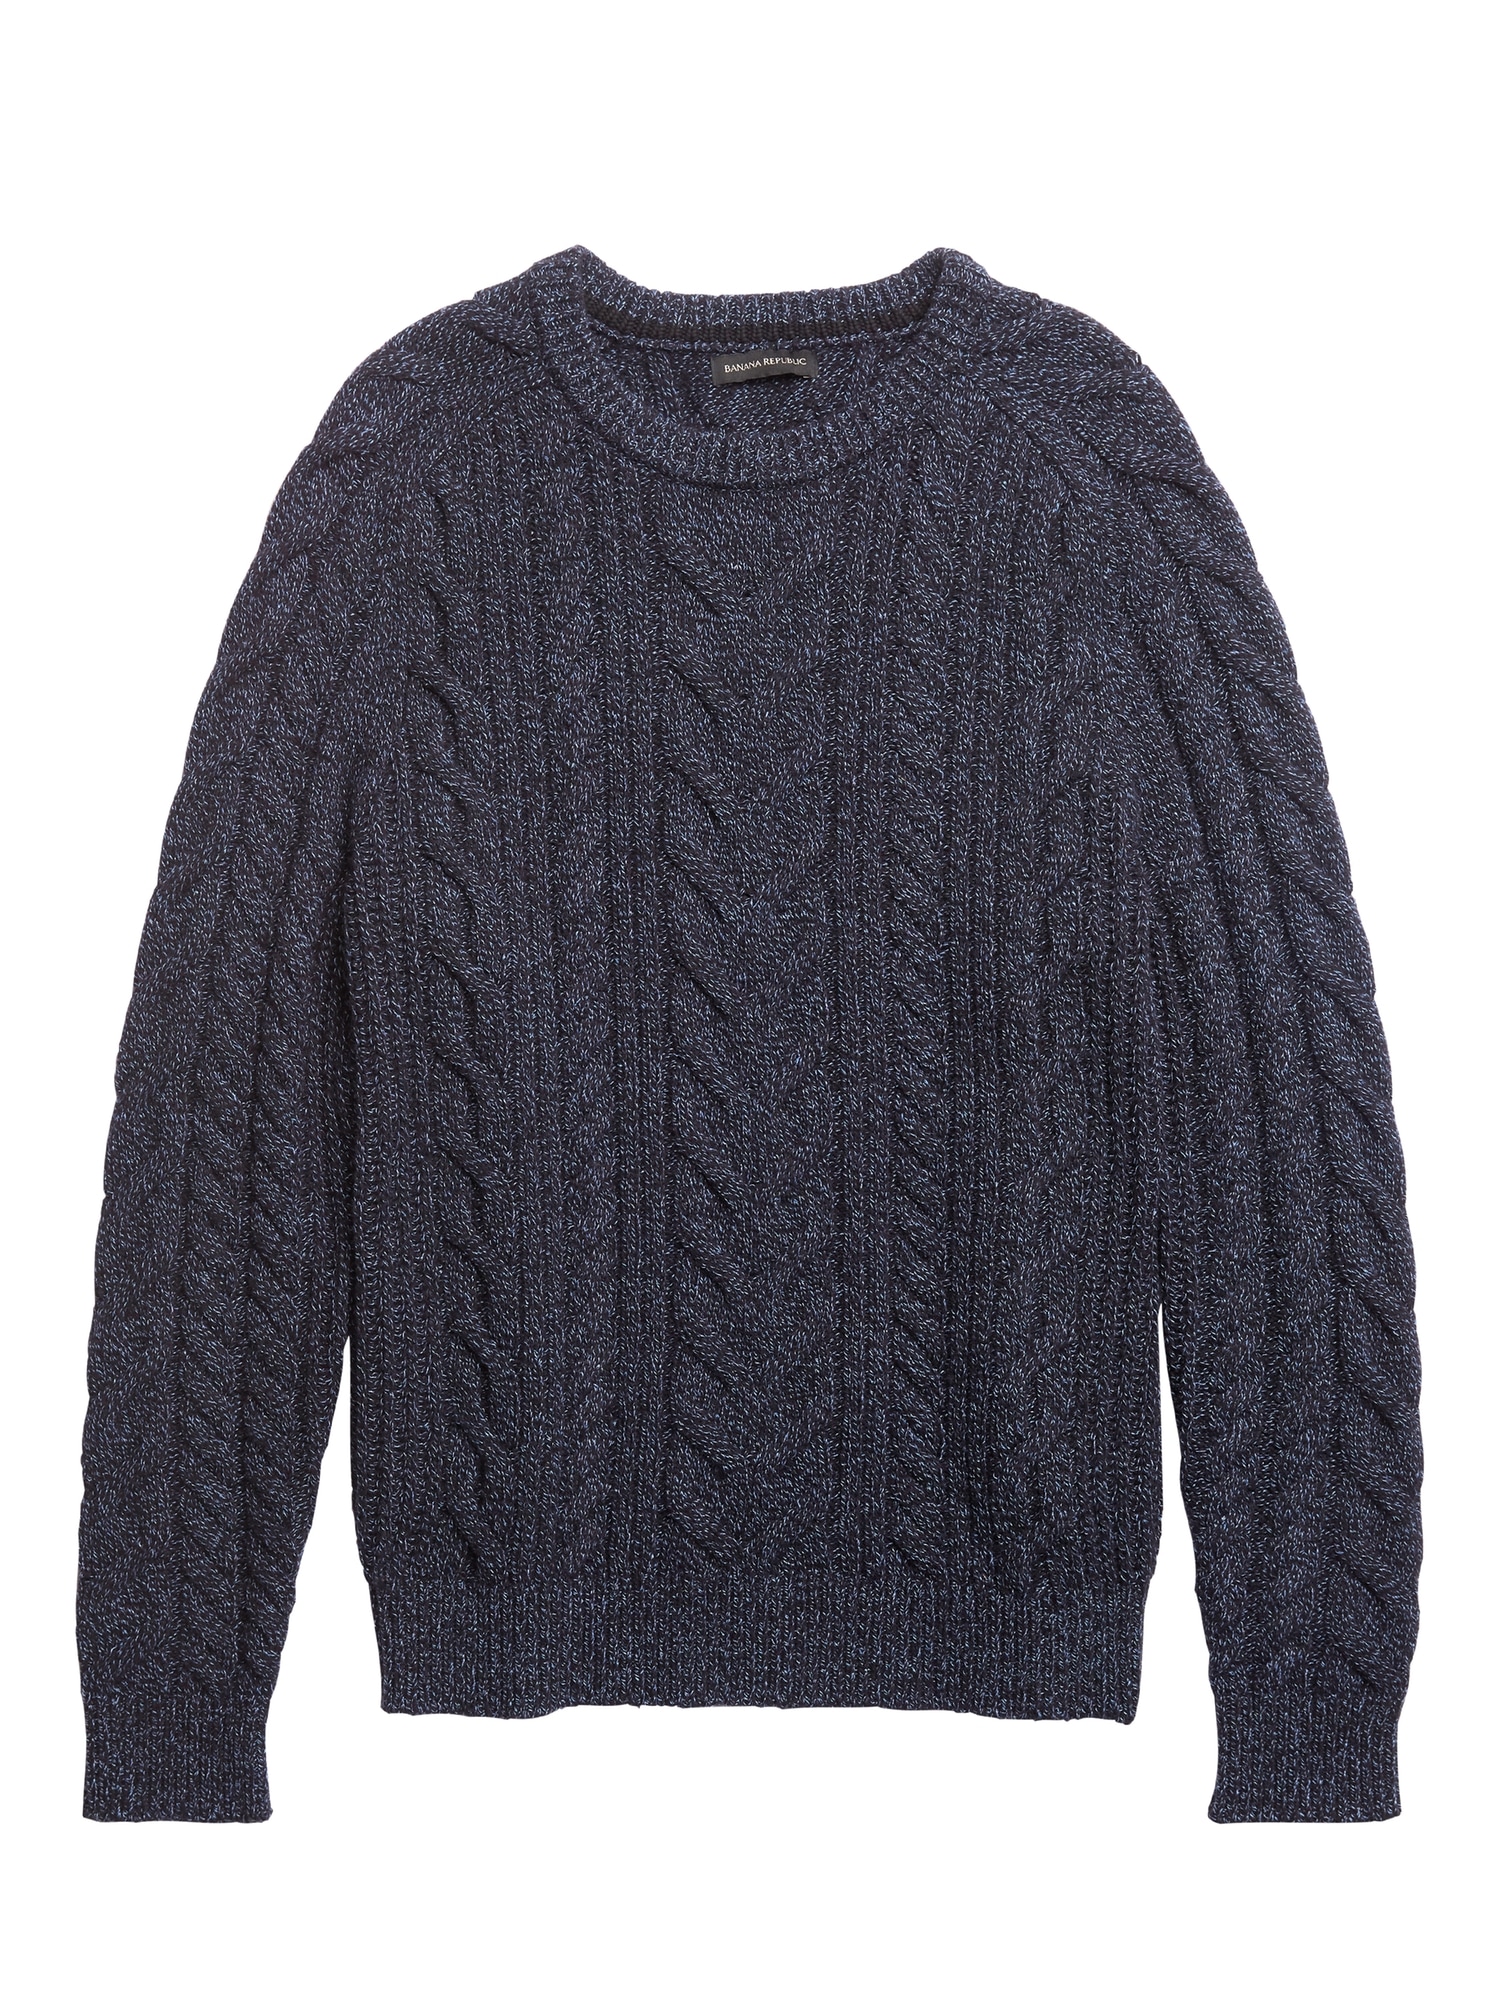 Wool-Blend Cable-Knit Sweater | Banana Republic